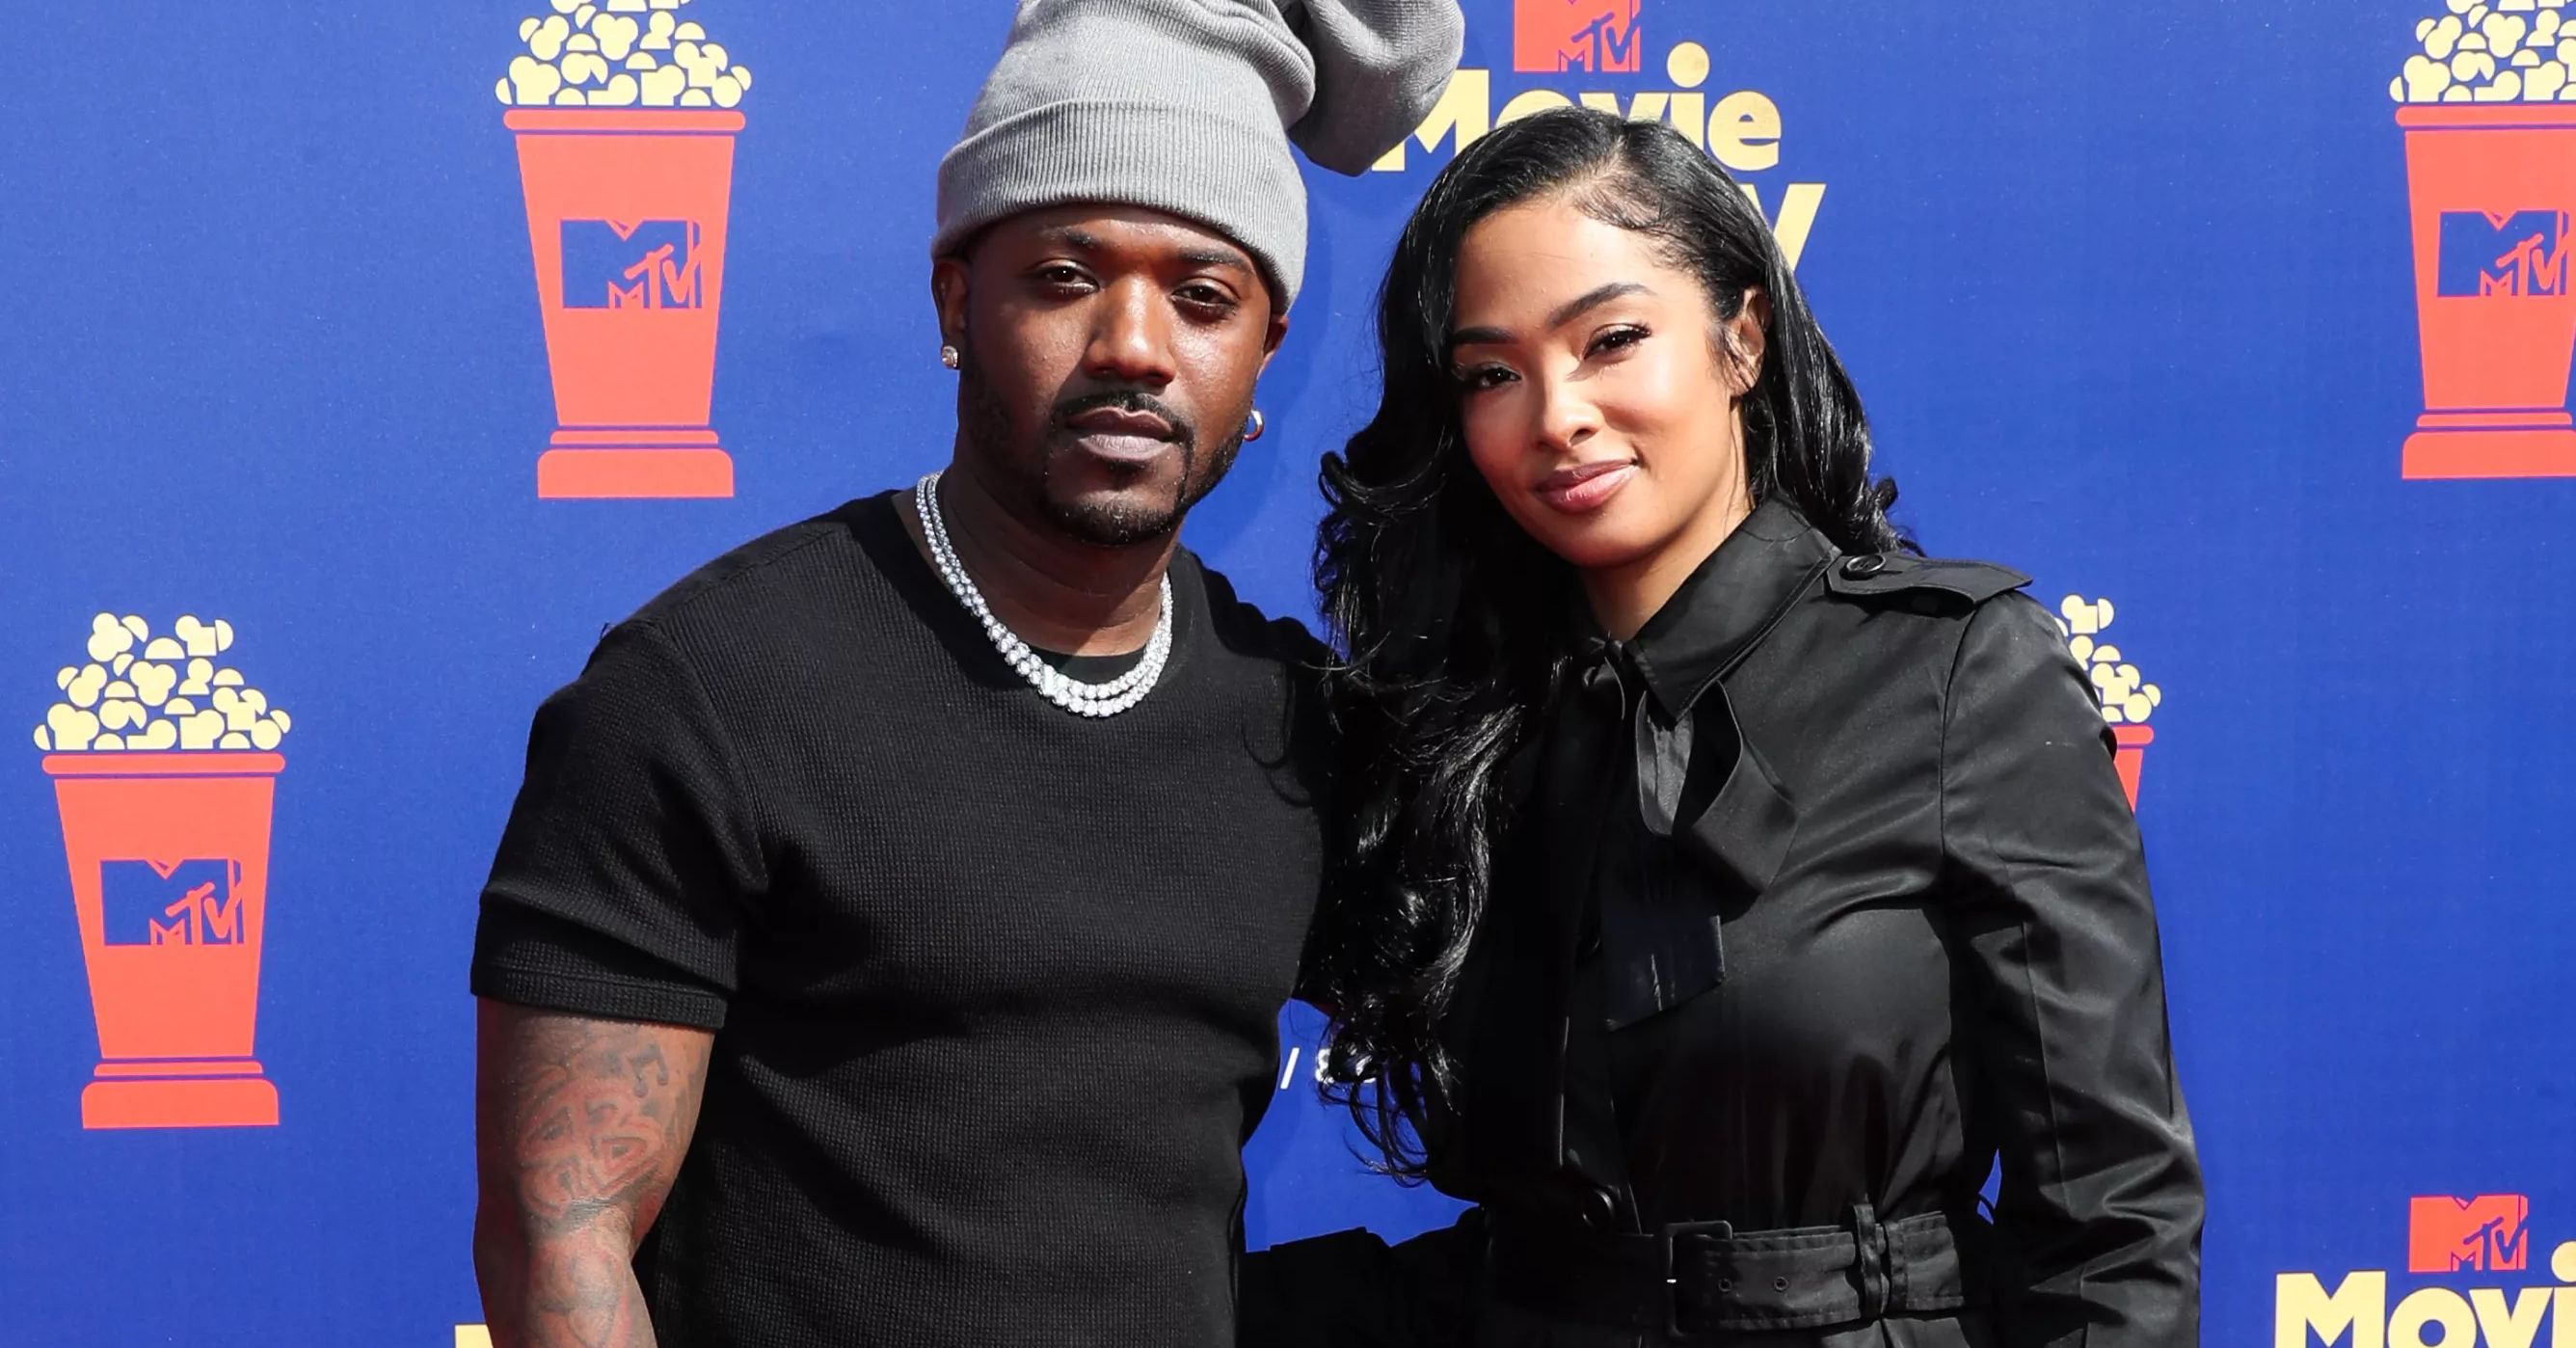 Ray J Files For Divorce From Princess Love, Asks For Joint Custody Of Their Children - The Blast